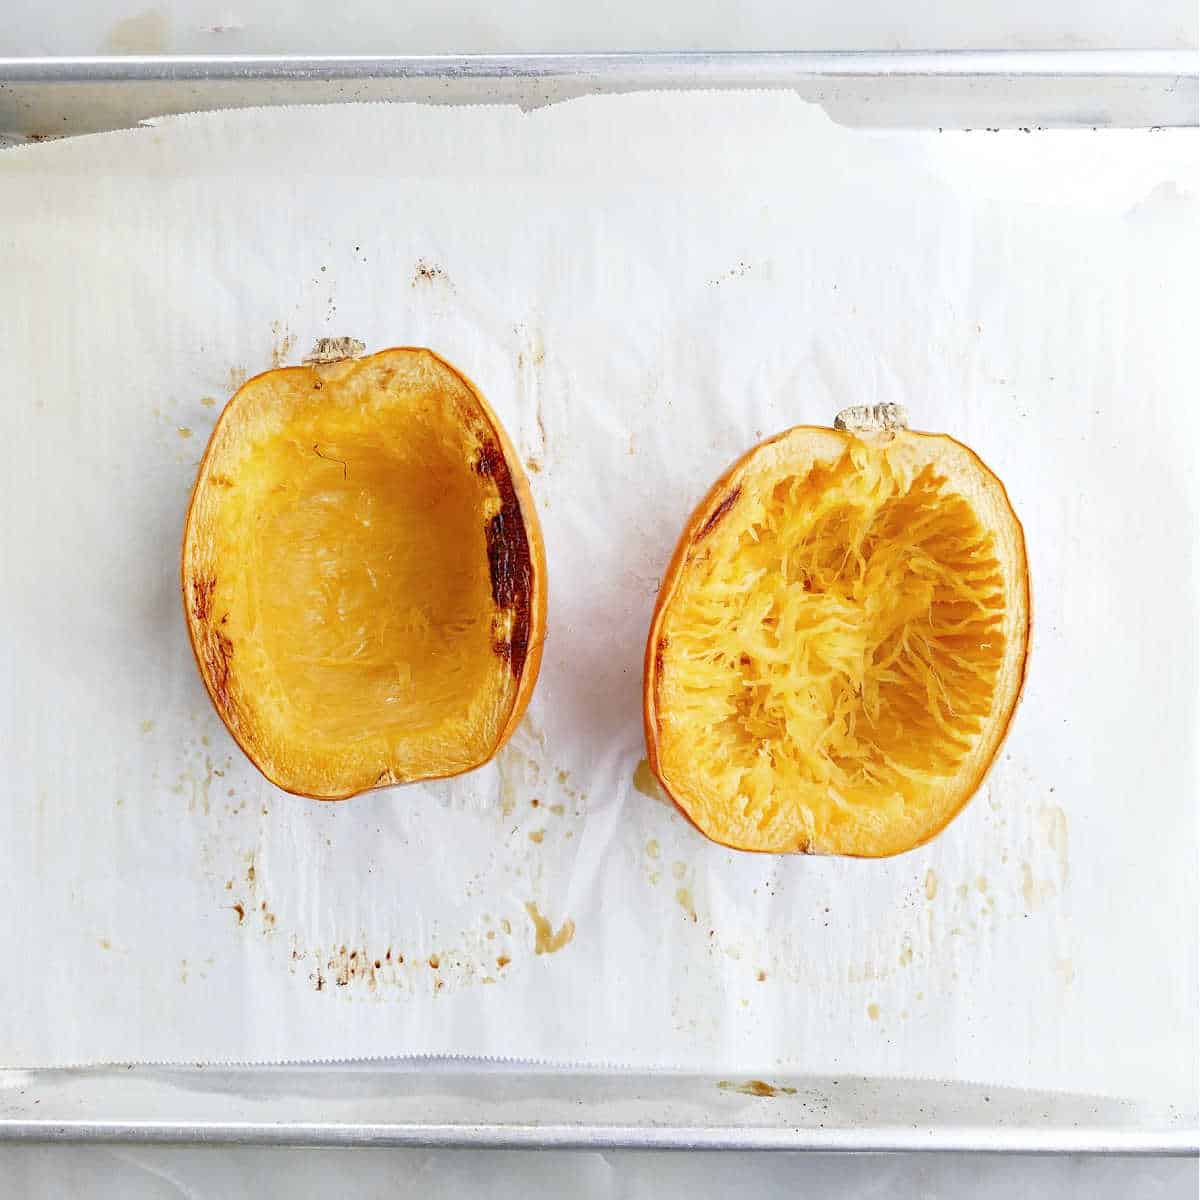 spaghetti squash halves cut side up on a baking sheet after roasting